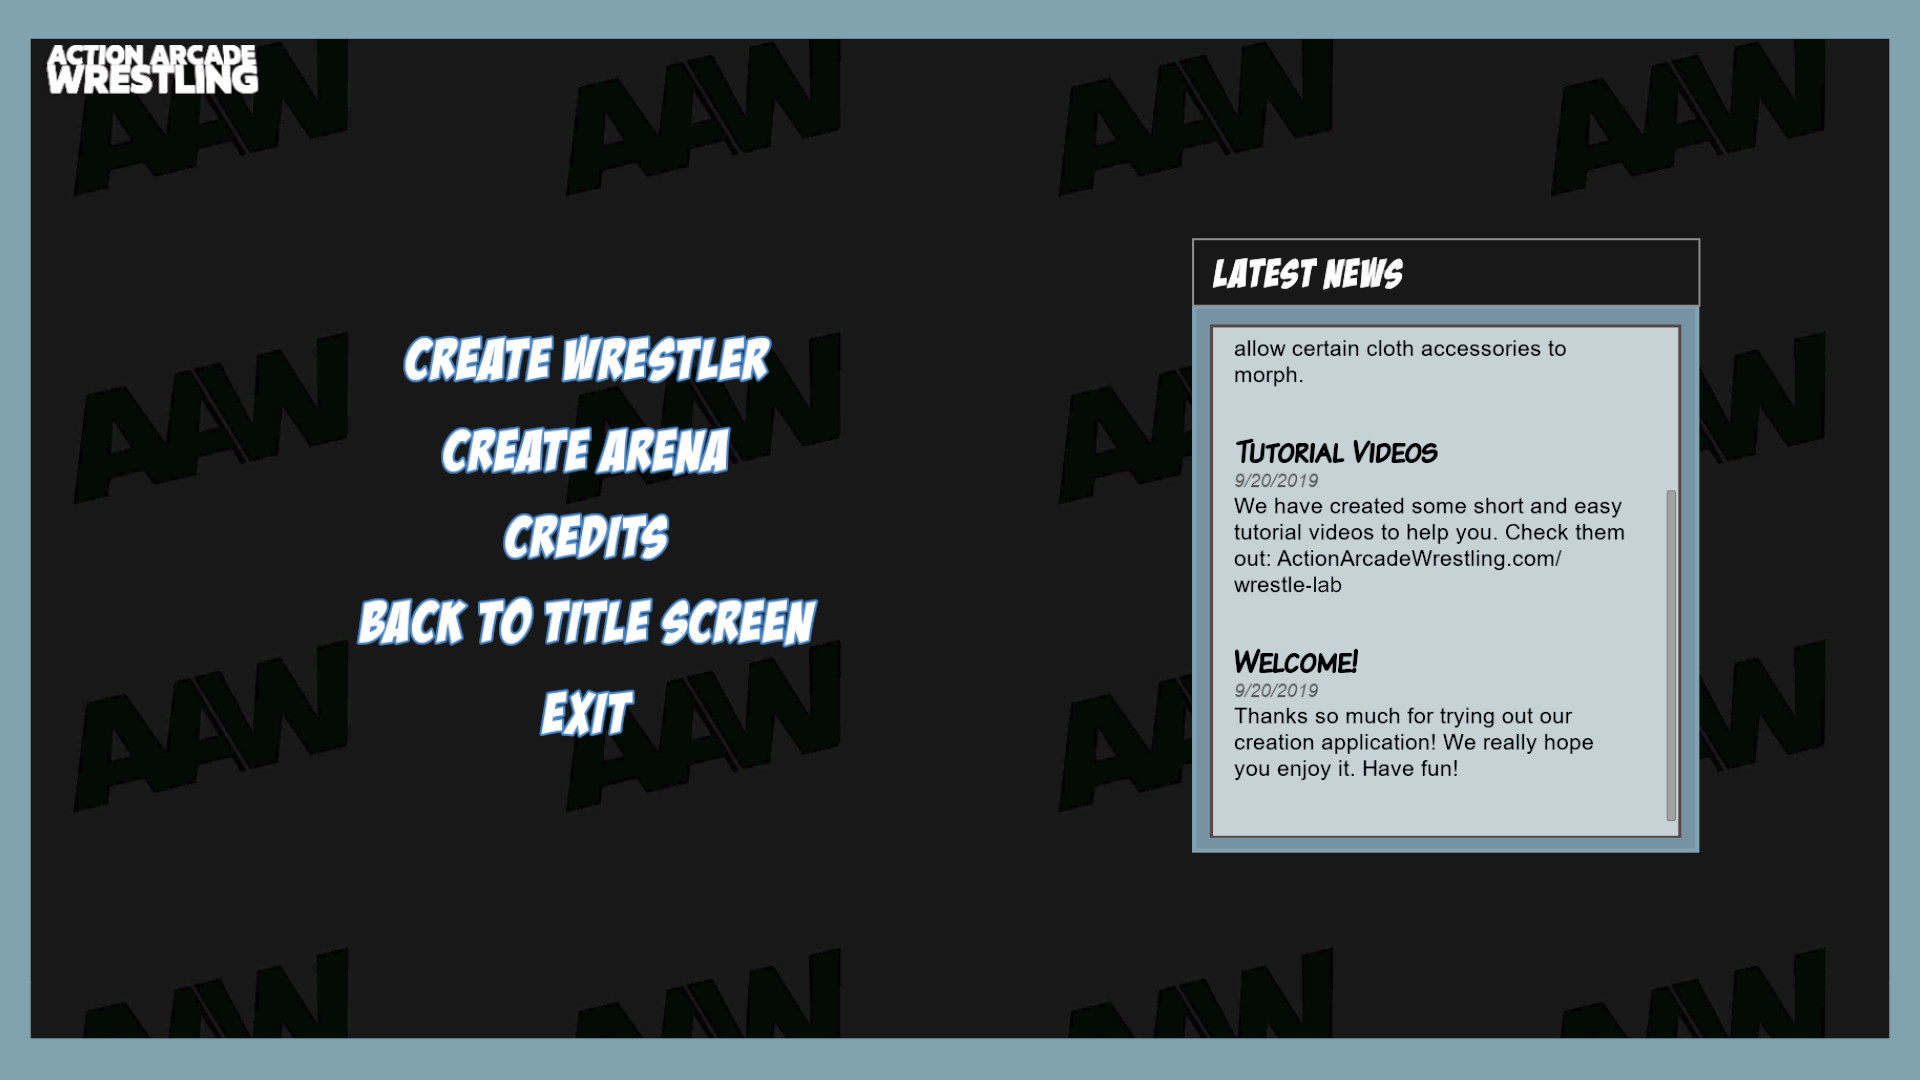 AAW Wrestle Lab Featured Screenshot #1